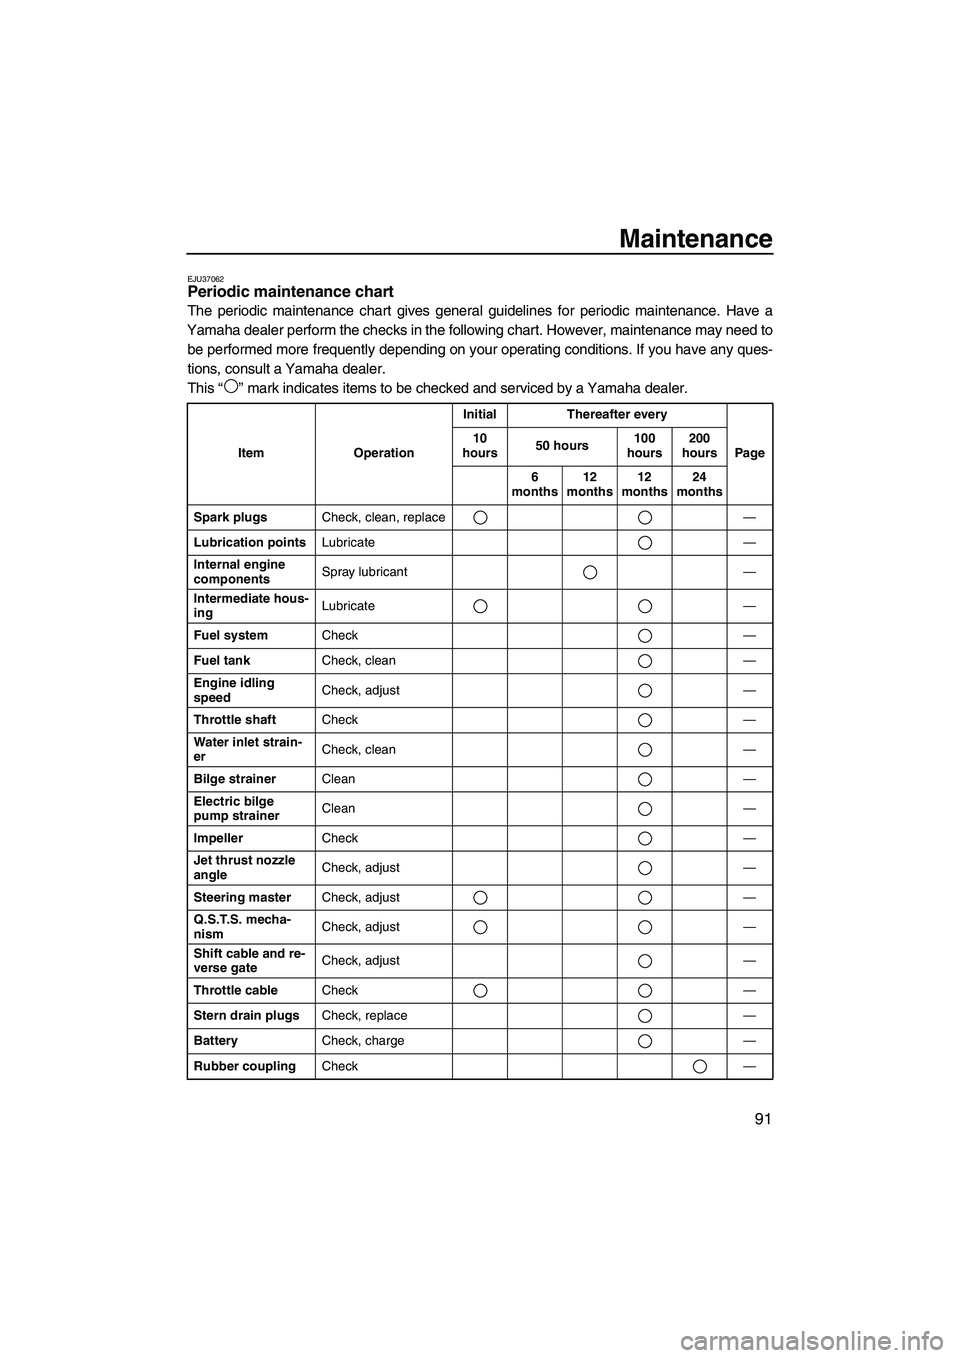 YAMAHA SVHO 2011  Owners Manual Maintenance
91
EJU37062Periodic maintenance chart 
The periodic maintenance chart gives general guidelines for periodic maintenance. Have a
Yamaha dealer perform the checks in the following chart. How